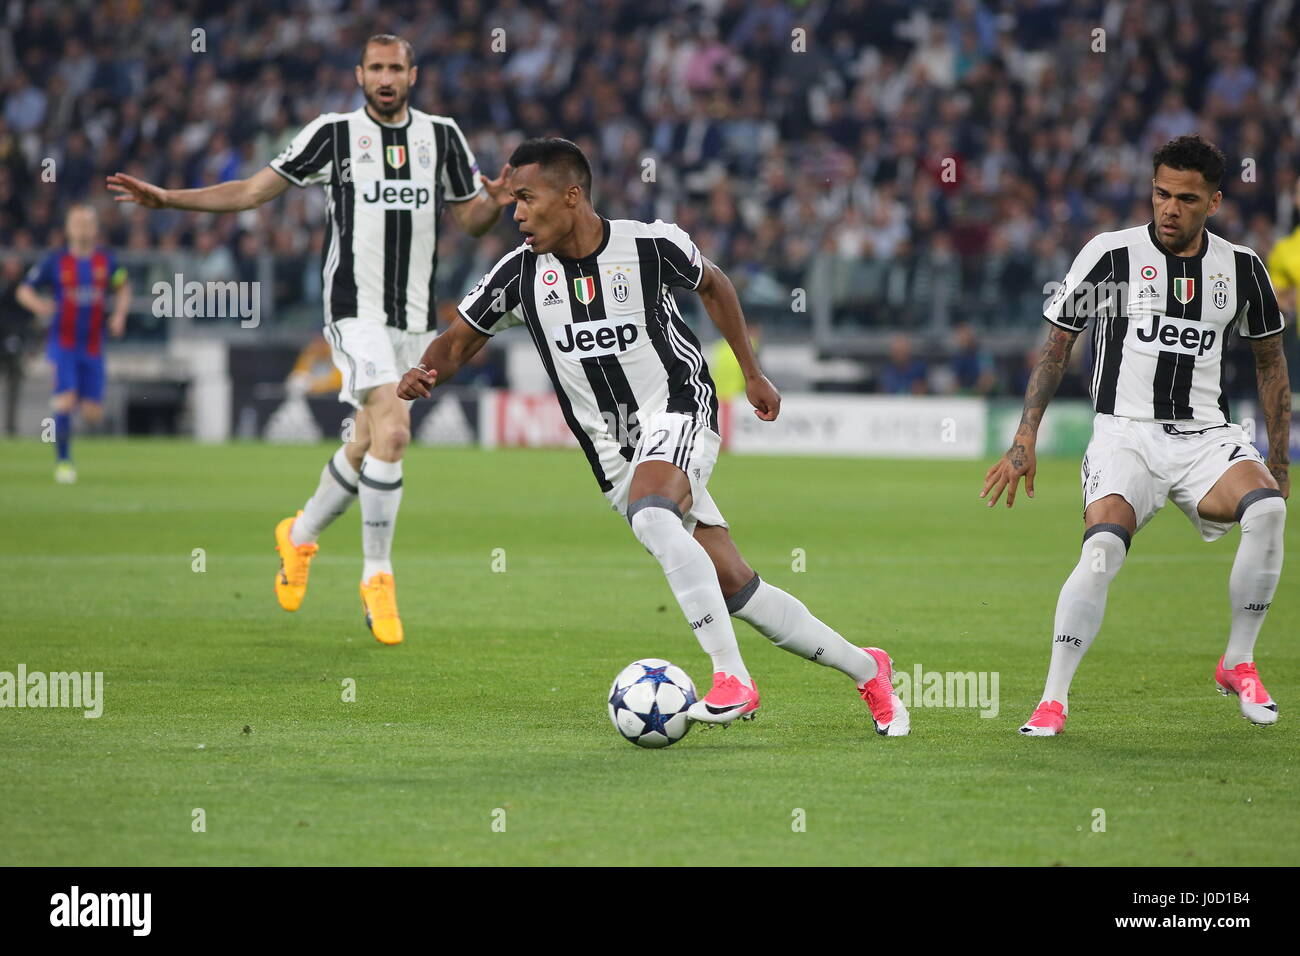 Turin, Italy. 11th Apr, 2017. Alex Sandro (Juventus FC) during the 1st leg of Champions League quarter-final between Juventus FC and FCB Barcelona at Juventus Stadium on April 11, 2017 in Turin, Italy. Juventus won 3-0 over Barcelona. Credit: Massimiliano Ferraro/Alamy Live News Stock Photo